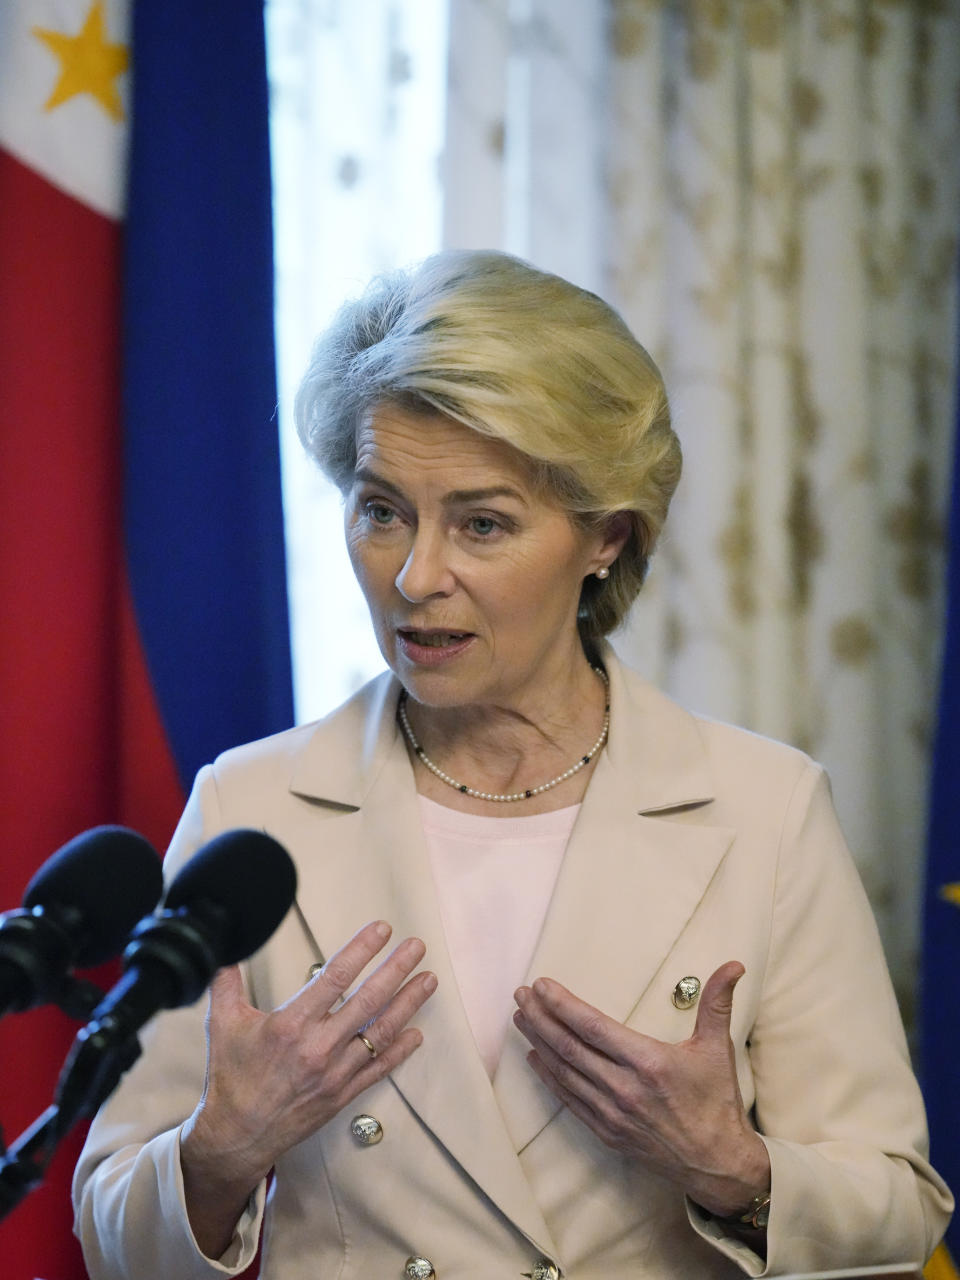 European Commission President Ursula von der Leyen gestures during a joint press statement with Philippine President Ferdinand Marcos Jr., not shown, at the Malacanang Presidential Palace in Manila, Philippines on, Monday, July 31, 2023. (AP Photo/Aaron Favila, Pool)